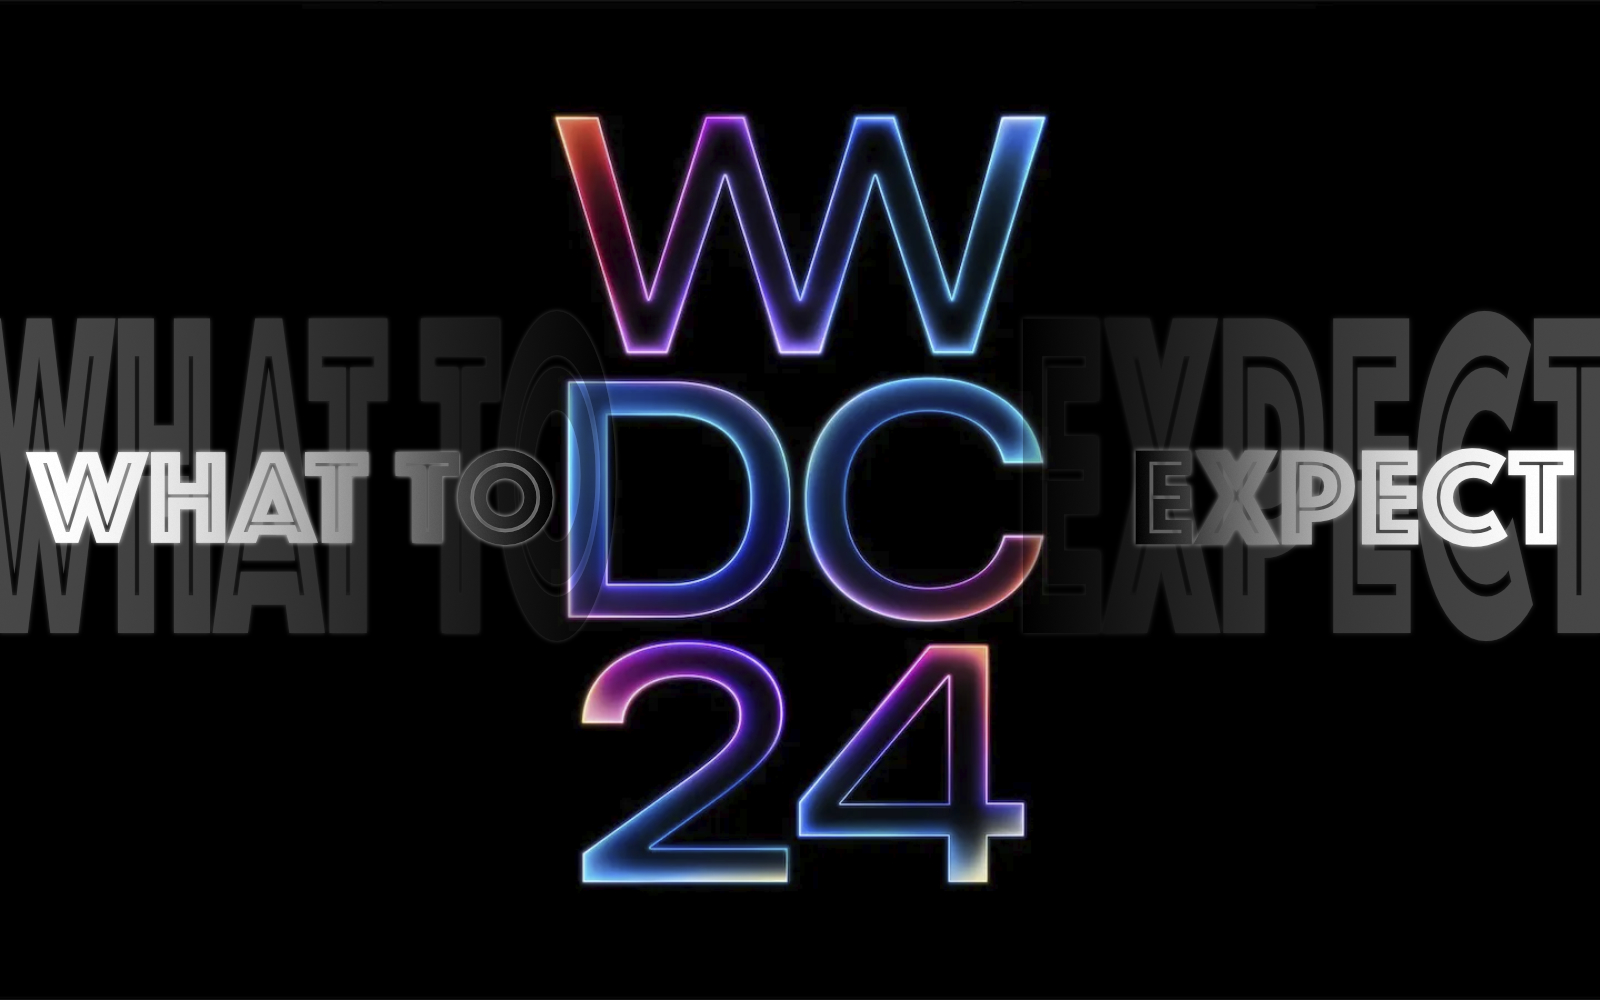 What to expect for wwdc24